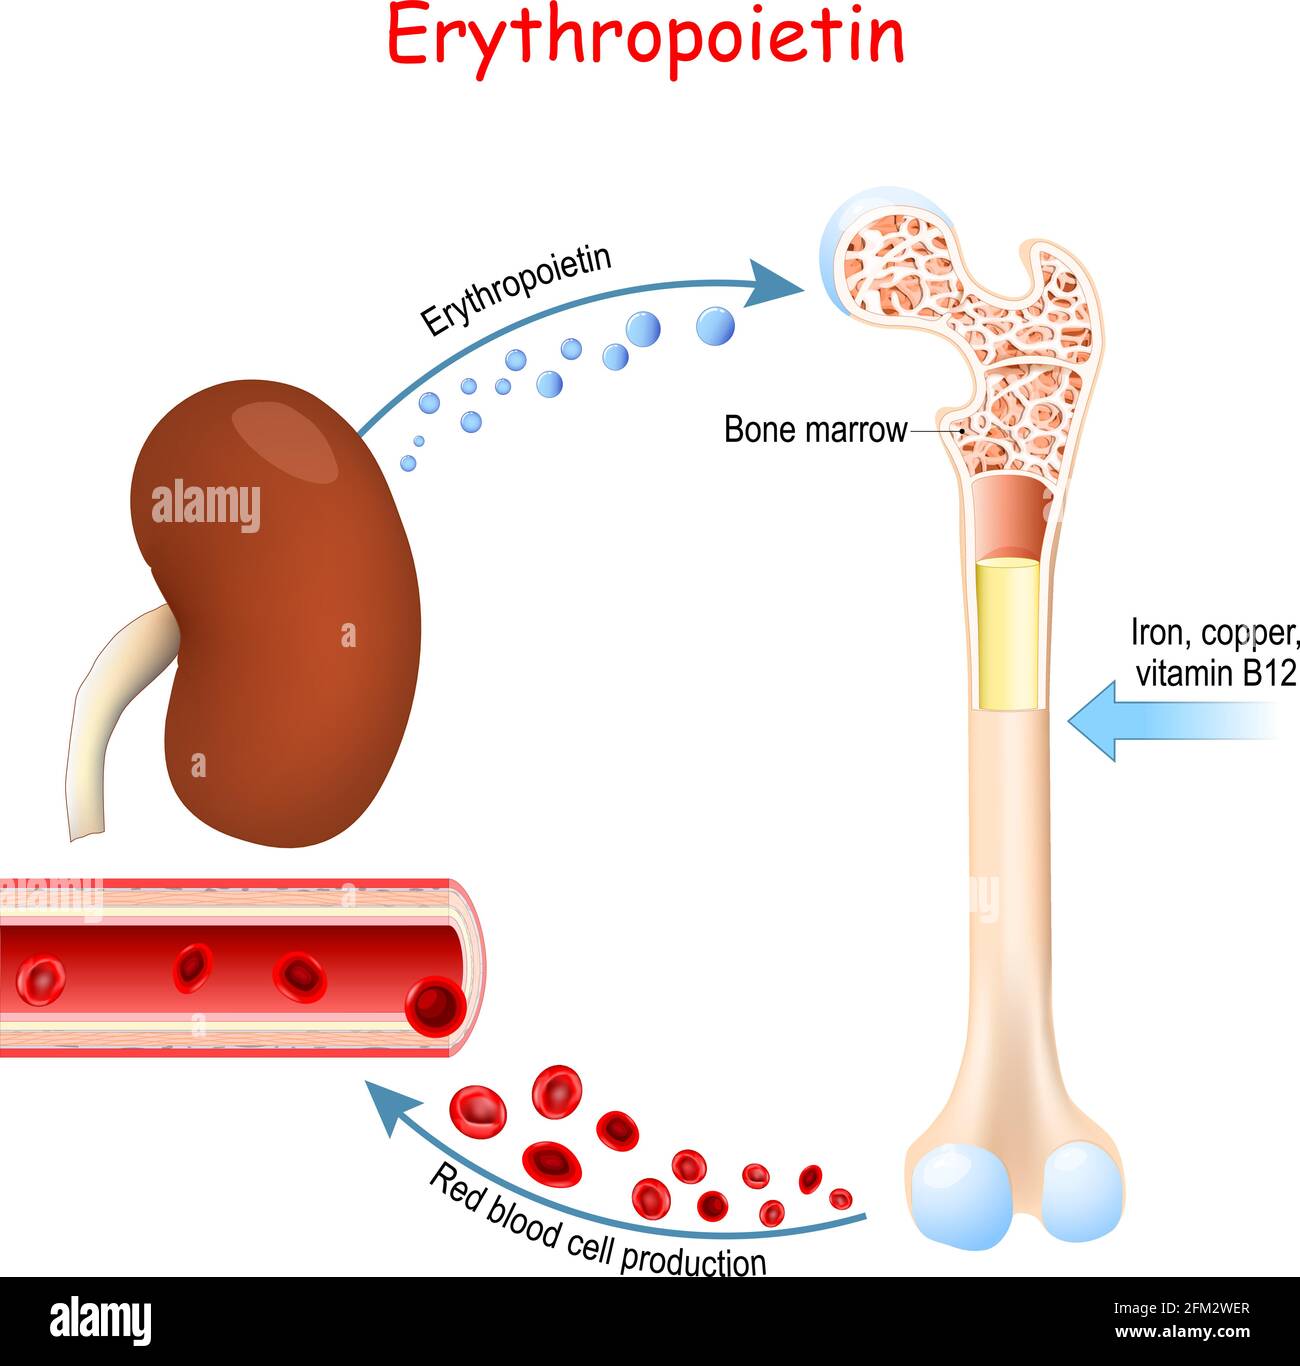 Erythropoietin. Glycoprotein cytokine secreted by the kidney in response to cellular hypoxia that stimulates red blood cell production Stock Vector